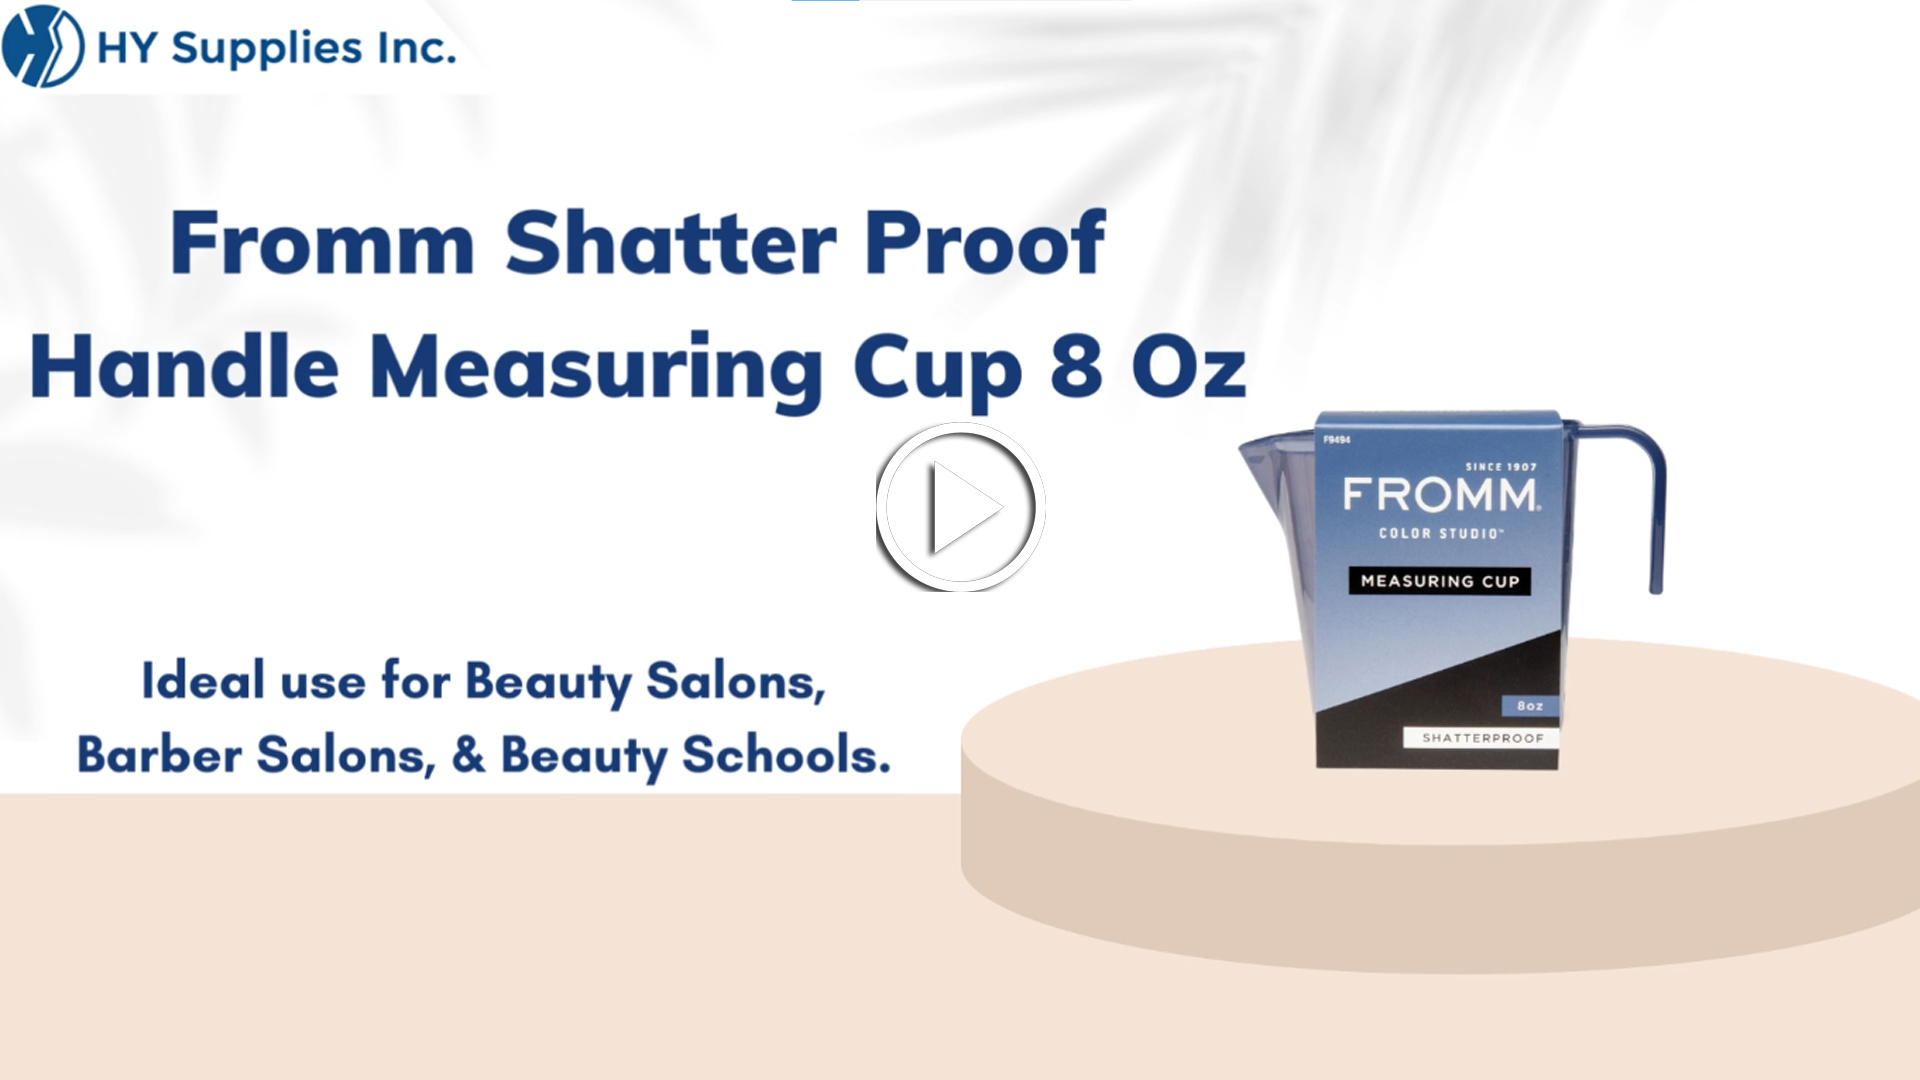 Fromm Shatter Proof Handle Measuring Cup 8 Oz.